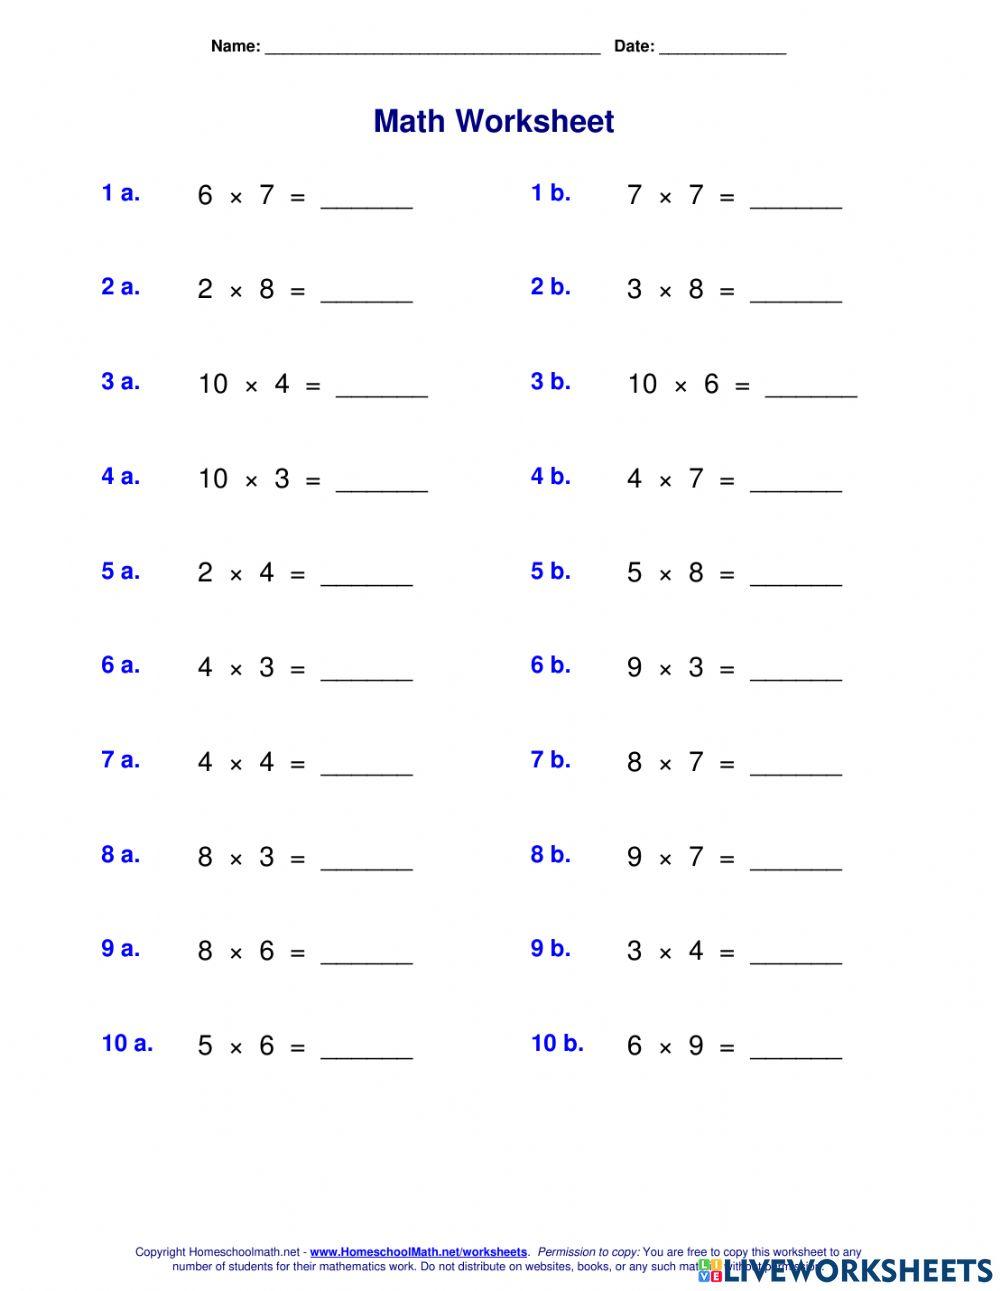 Multiplication of one digit